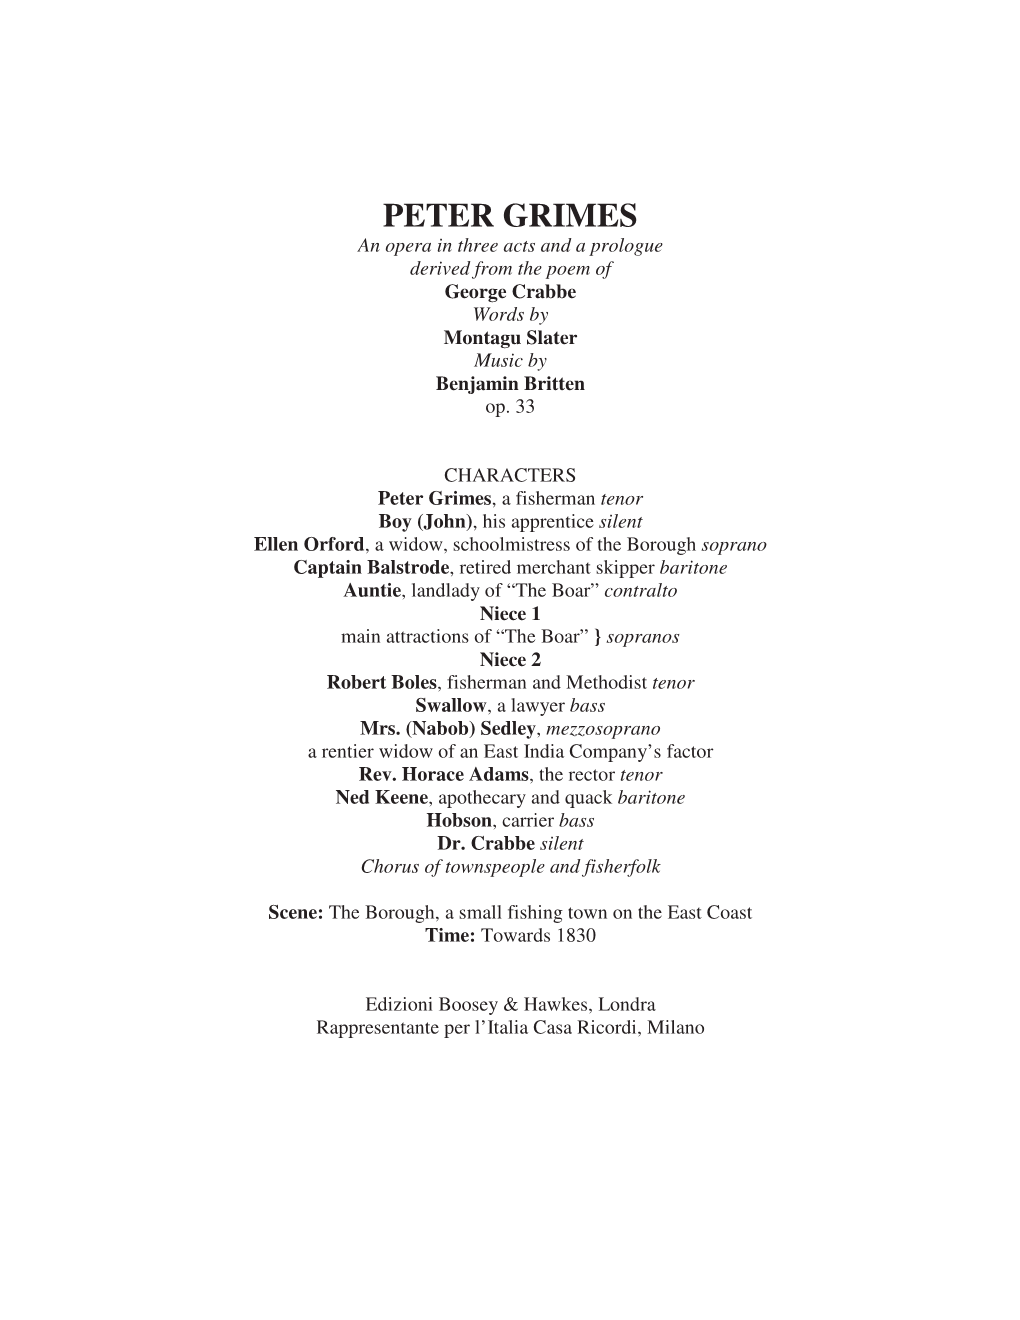 PETER GRIMES an Opera in Three Acts and a Prologue Derived from the Poem of George Crabbe Words by Montagu Slater Music by Benjamin Britten Op